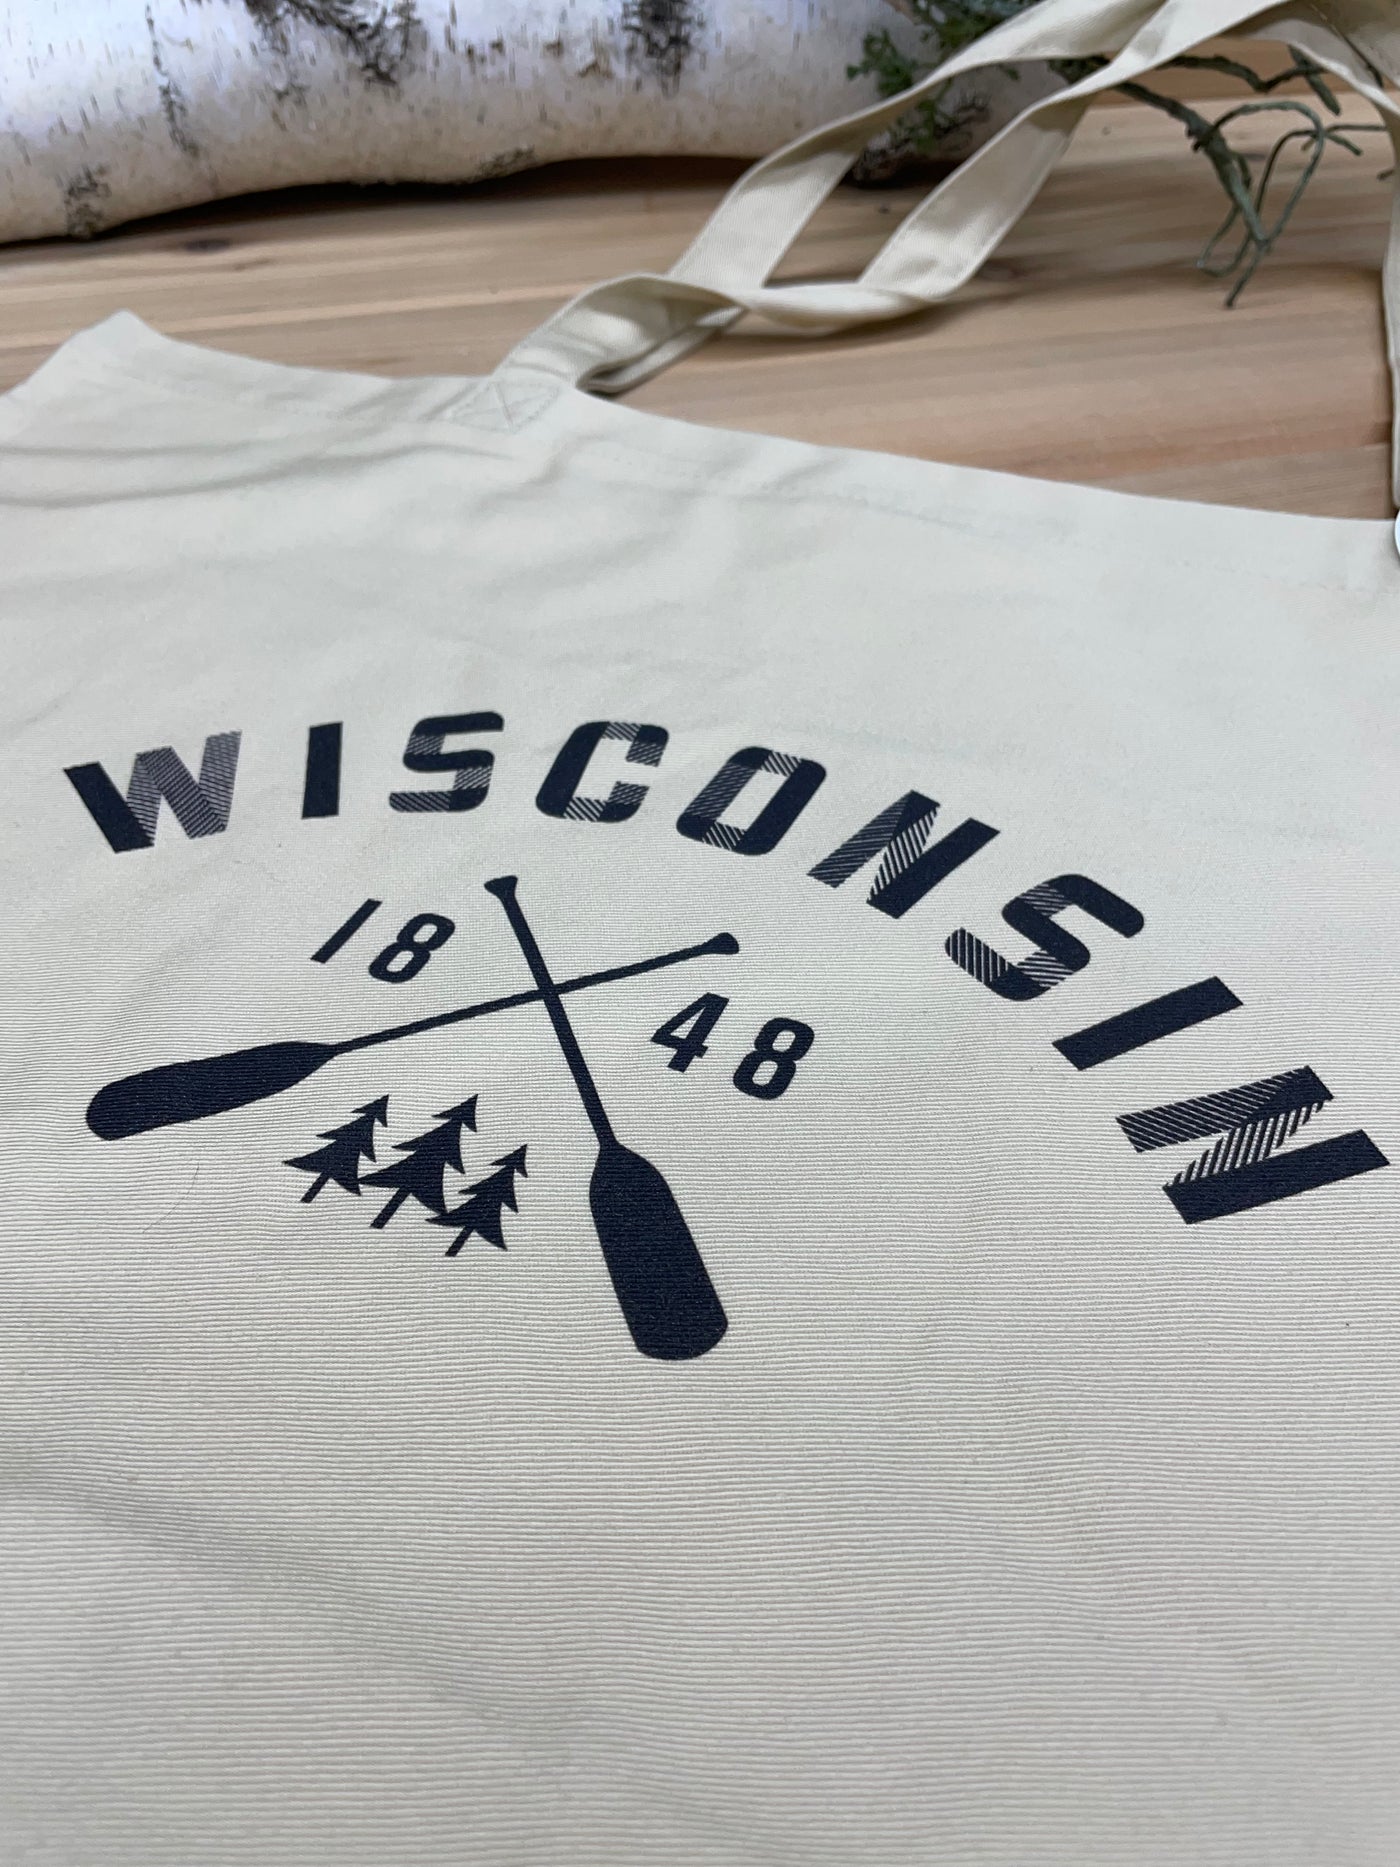 Wisconsin paddle design in black on organic canvas tote bag